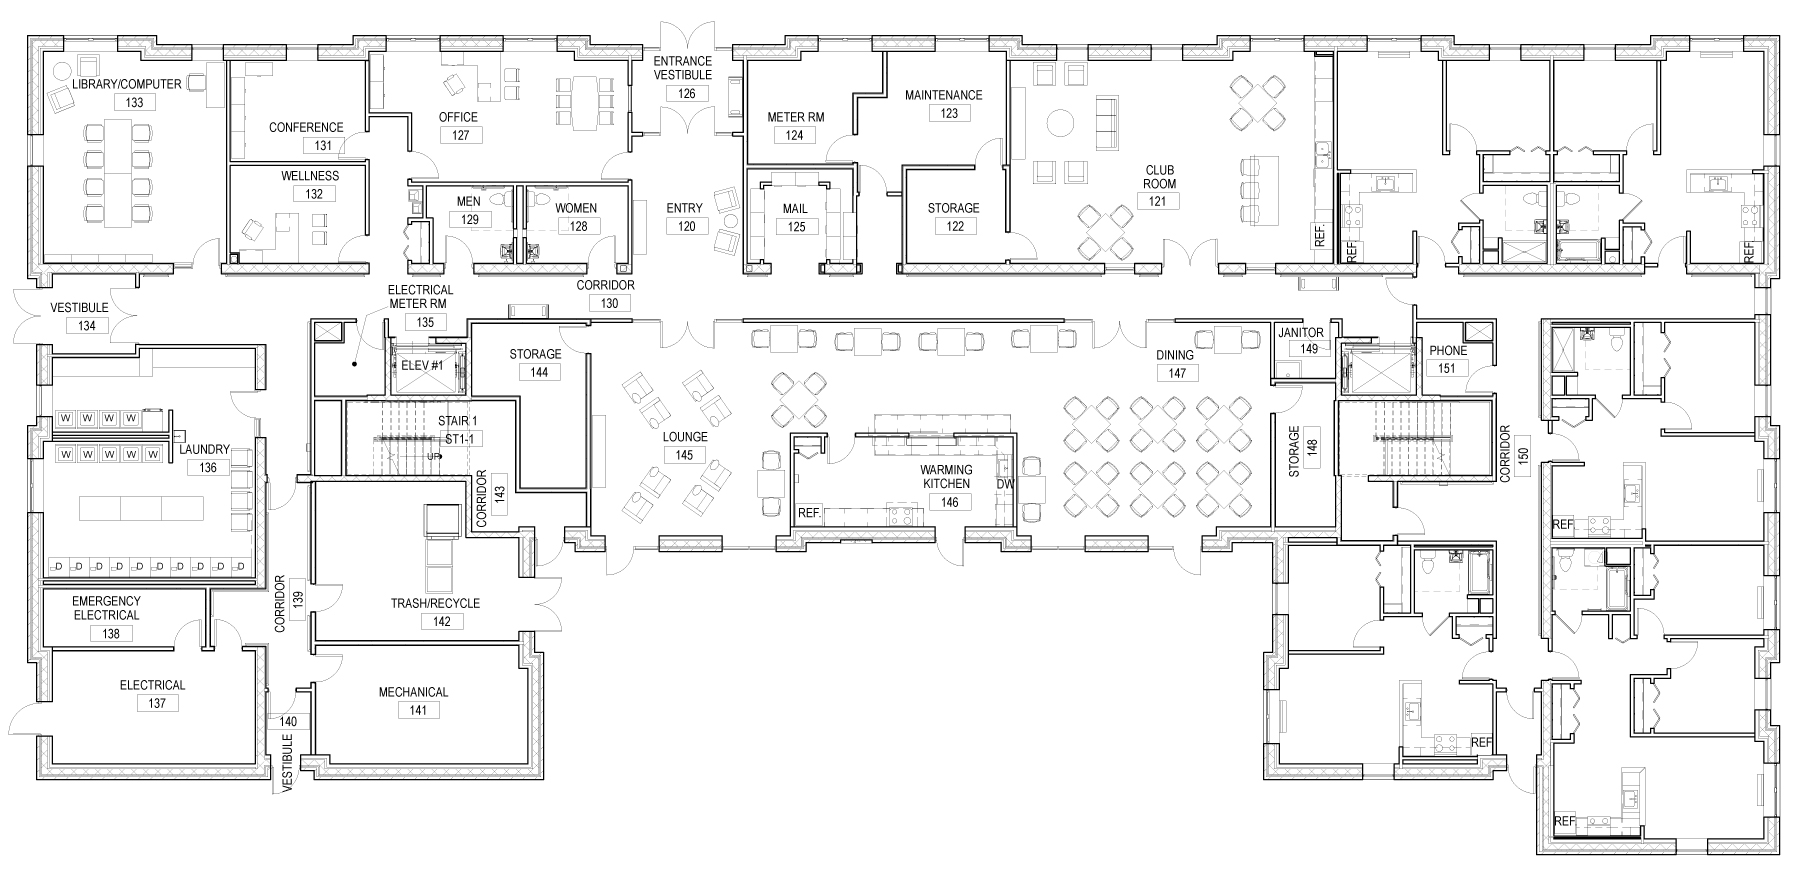 Furniture Layout - Midway Pointe